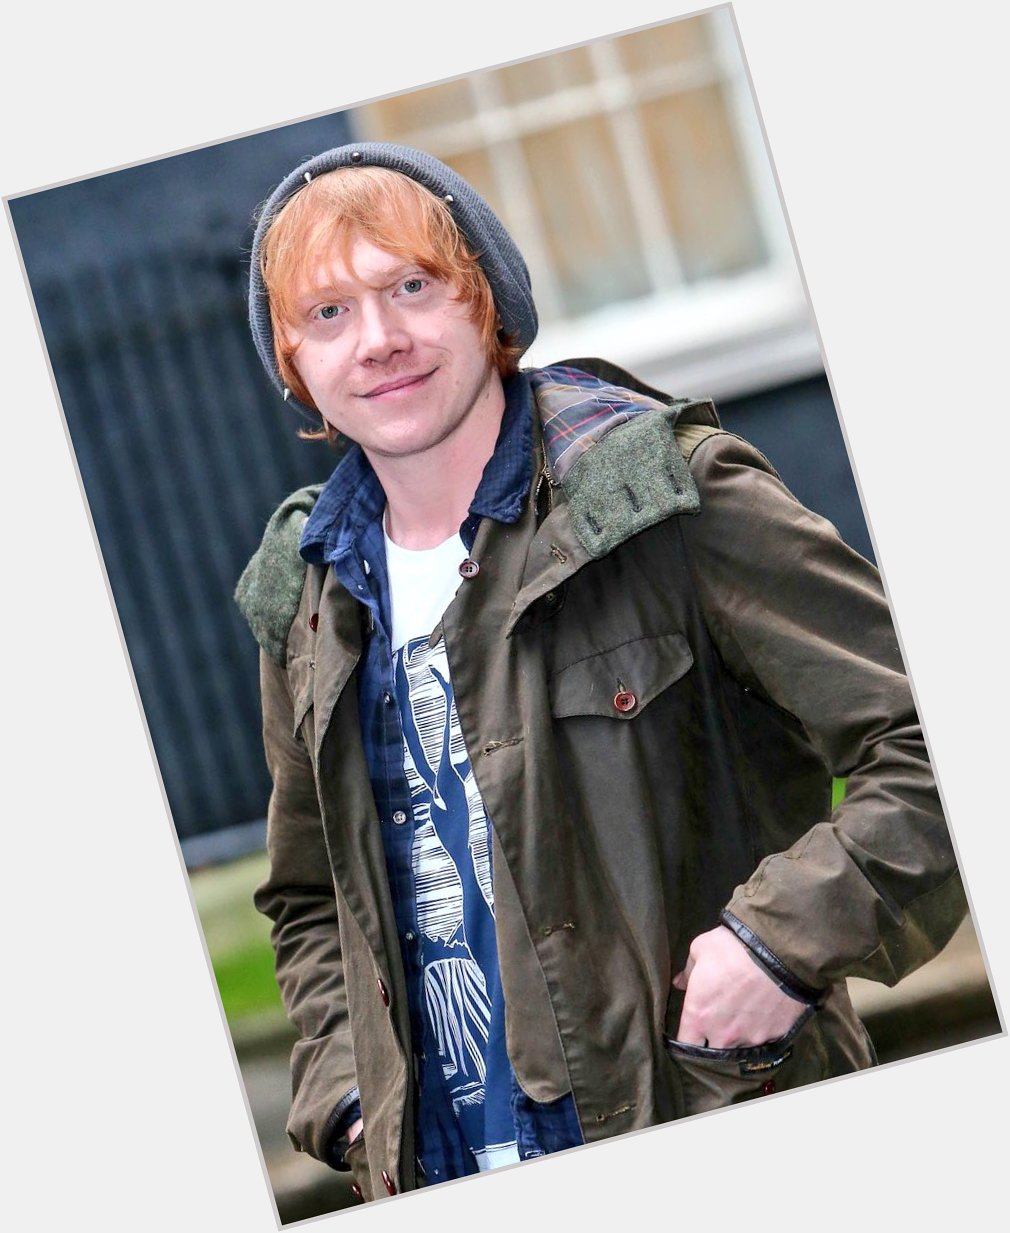 Happy 29th Birthday to one of my favourite actors ever, Rupert Grint!   